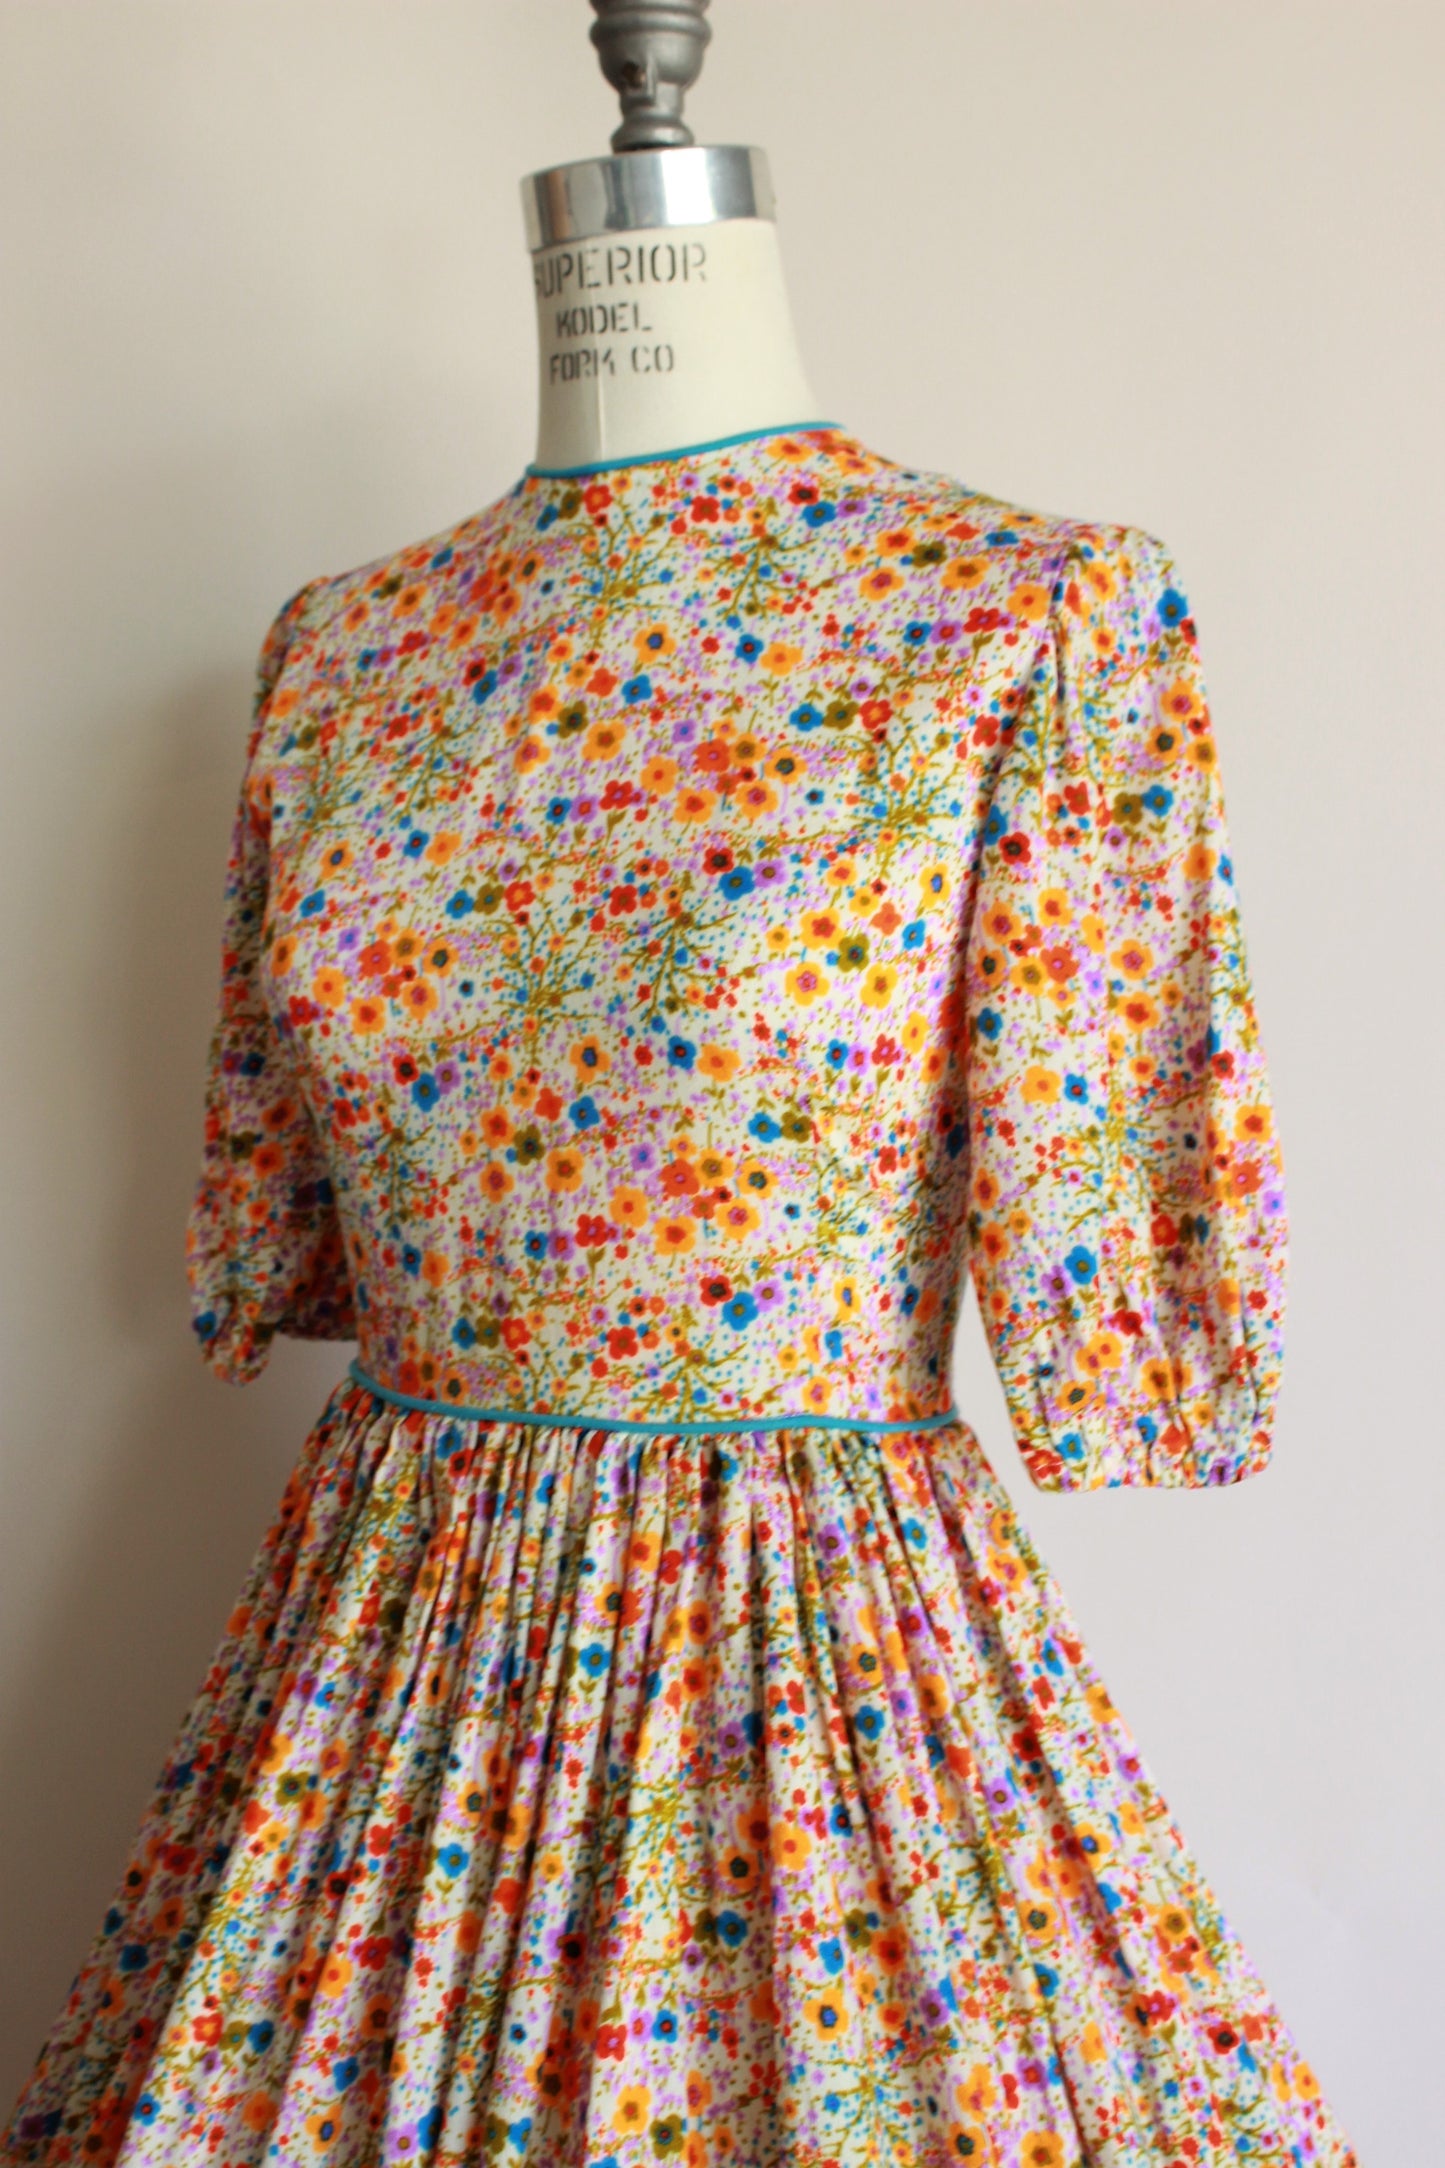 Vintage 1950s 1960s Watercolor Floral Fit And Flare Dress